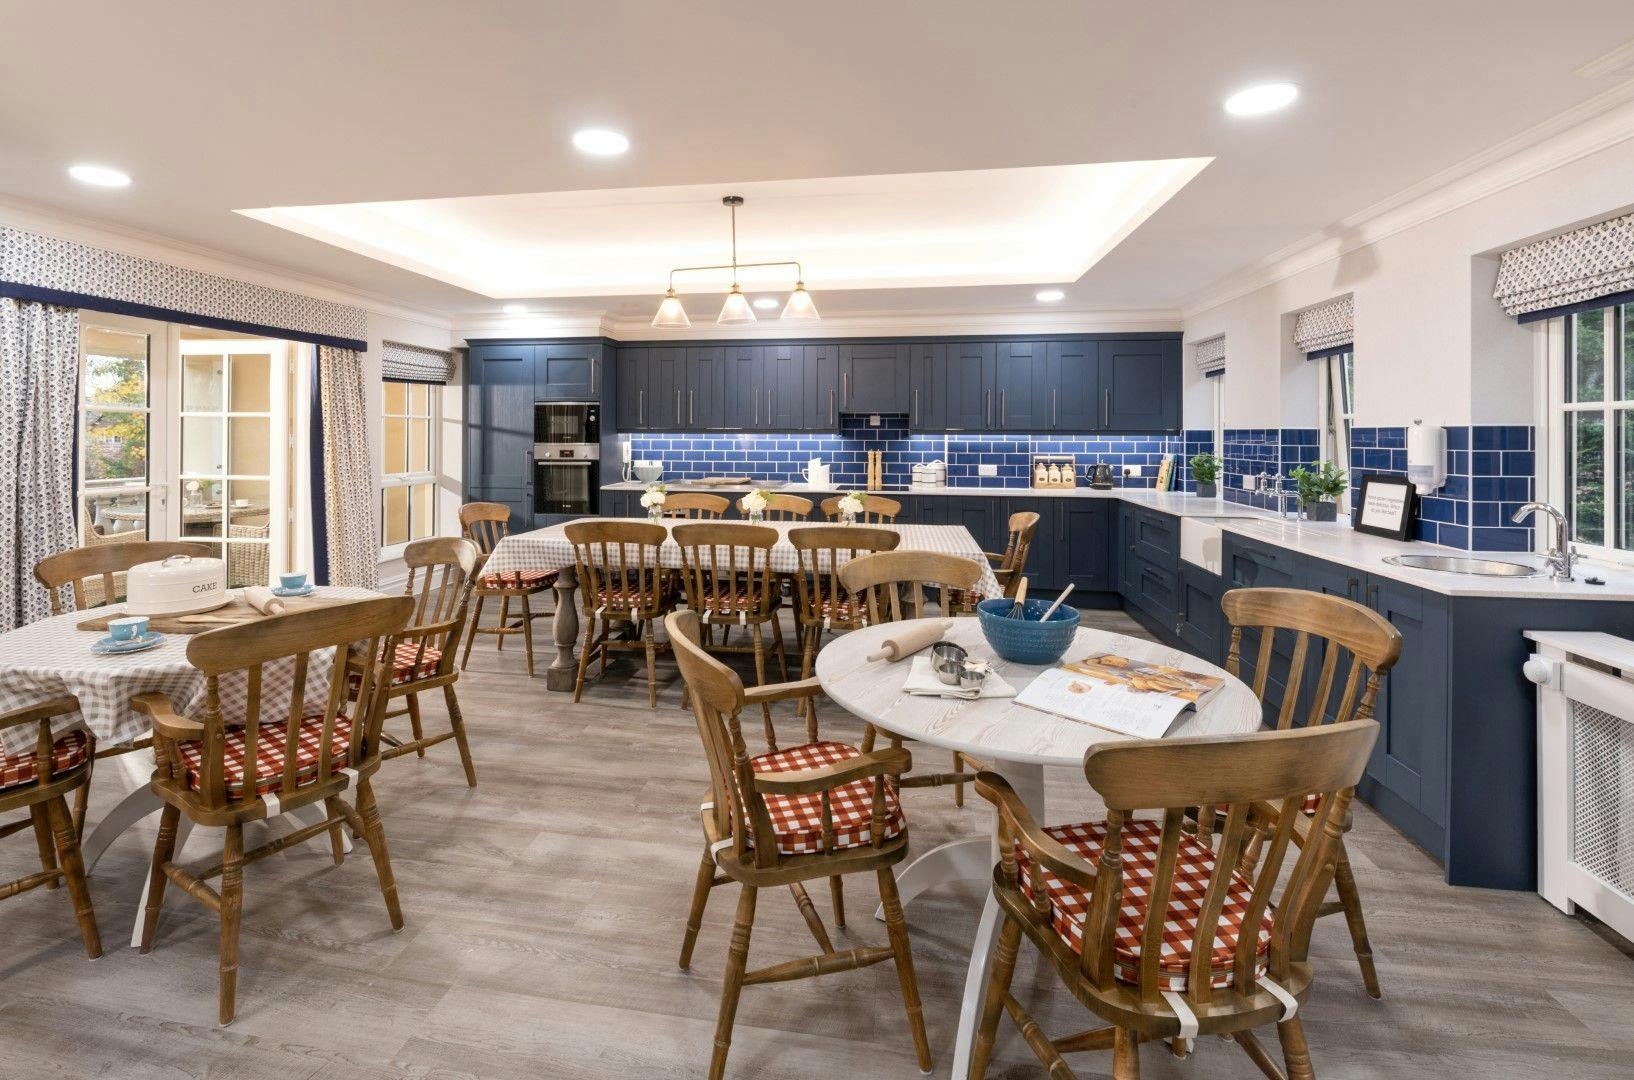 Dining Area at Hutton View Care Home in Brentwood, Essex